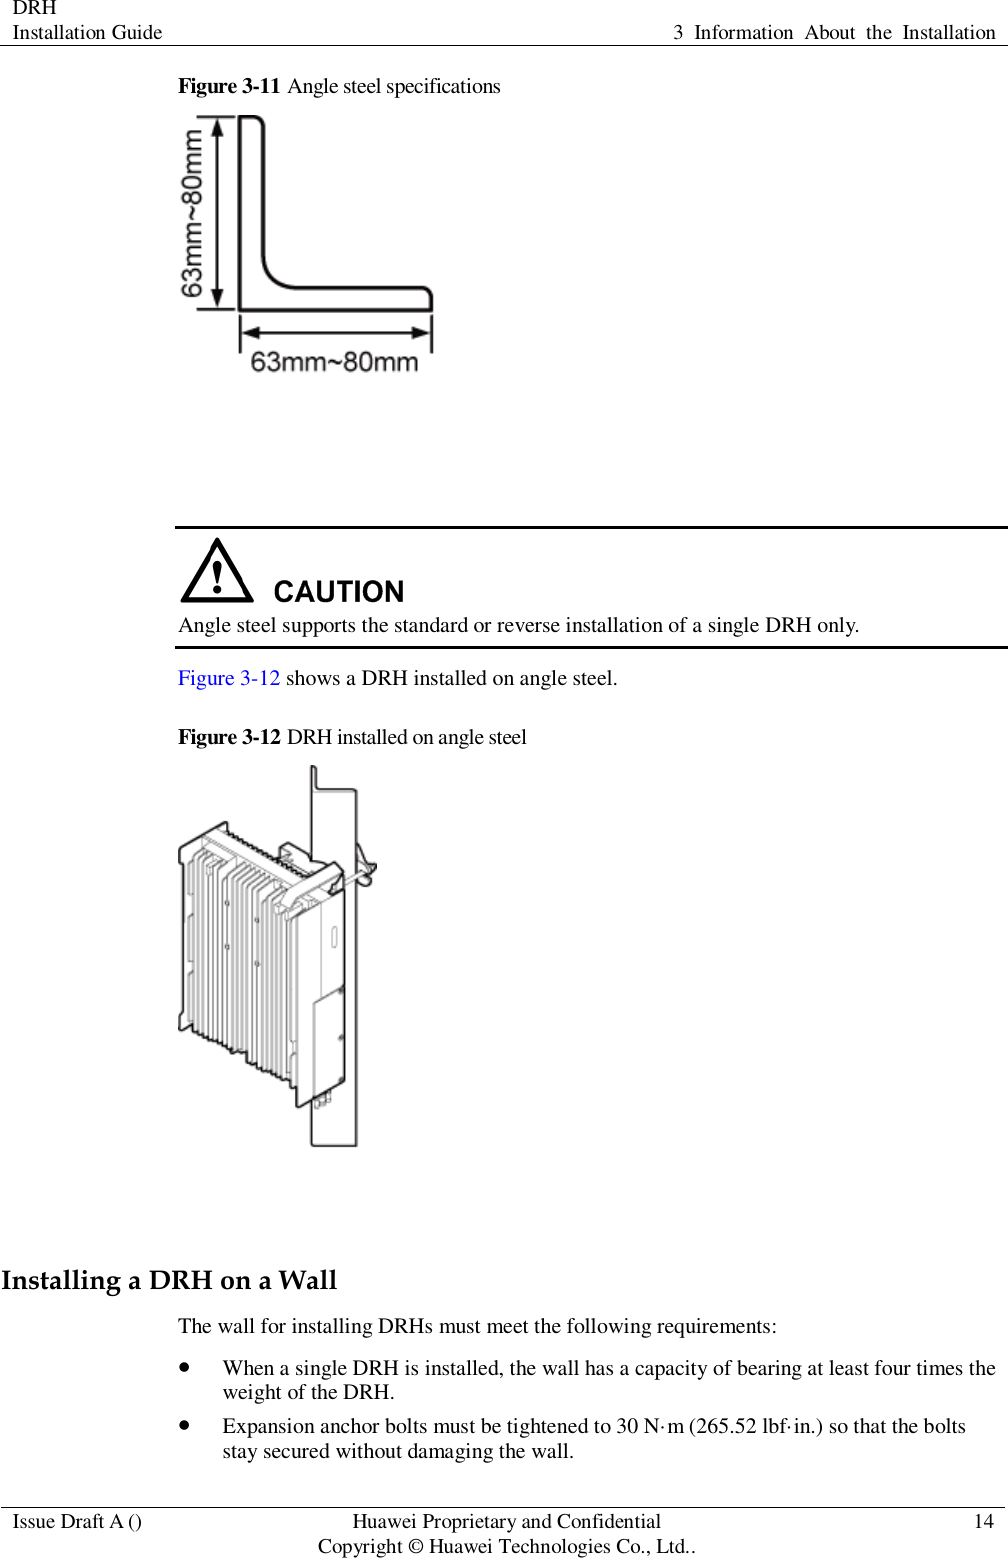 DRH   Installation Guide 3  Information  About  the  Installation  Issue Draft A () Huawei Proprietary and Confidential                                     Copyright © Huawei Technologies Co., Ltd.. 14  Figure 3-11 Angle steel specifications     Angle steel supports the standard or reverse installation of a single DRH only. Figure 3-12 shows a DRH installed on angle steel. Figure 3-12 DRH installed on angle steel   Installing a DRH on a Wall The wall for installing DRHs must meet the following requirements:    When a single DRH is installed, the wall has a capacity of bearing at least four times the weight of the DRH.  Expansion anchor bolts must be tightened to 30 N·m (265.52 lbf·in.) so that the bolts stay secured without damaging the wall. 